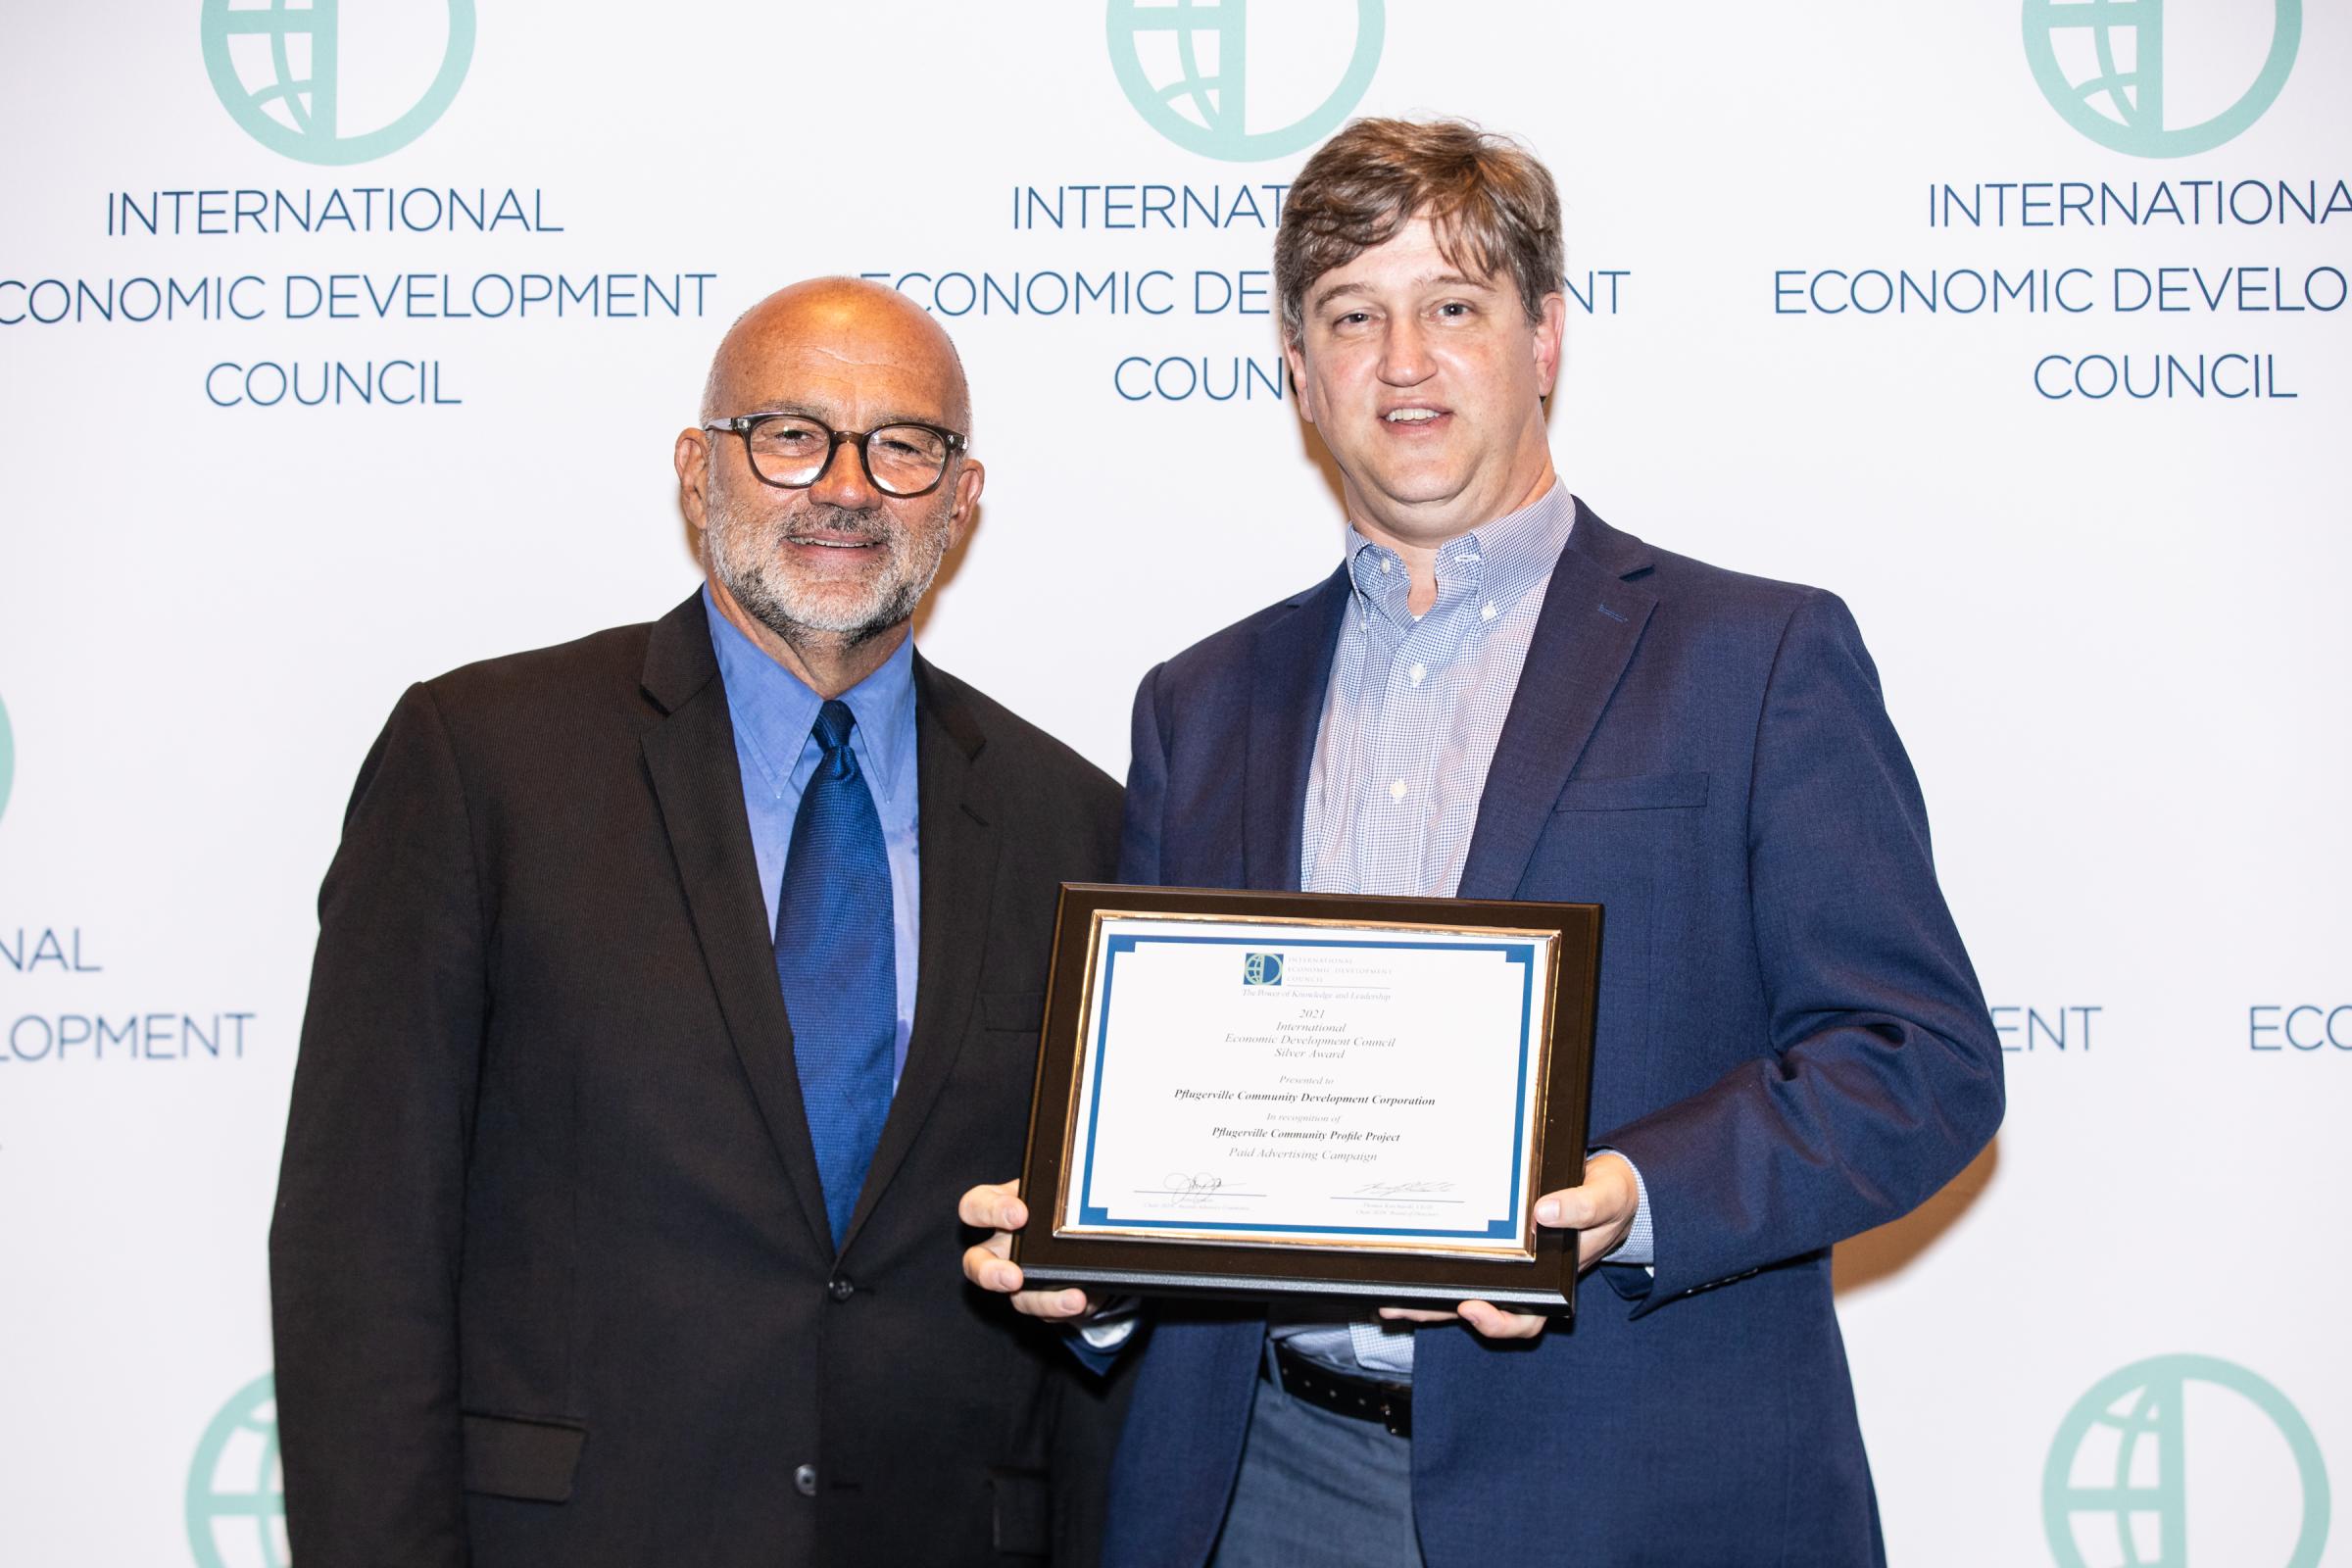 PFLUGERVILLE COMMUNITY DEVELOPMENT CORP. RECEIVES EXCELLENCE IN ECONOMIC DEVELOPMENT AWARD FROM THE INTERNATIONAL ECONOMIC DEVELOPMENT COUNCIL Main Photo